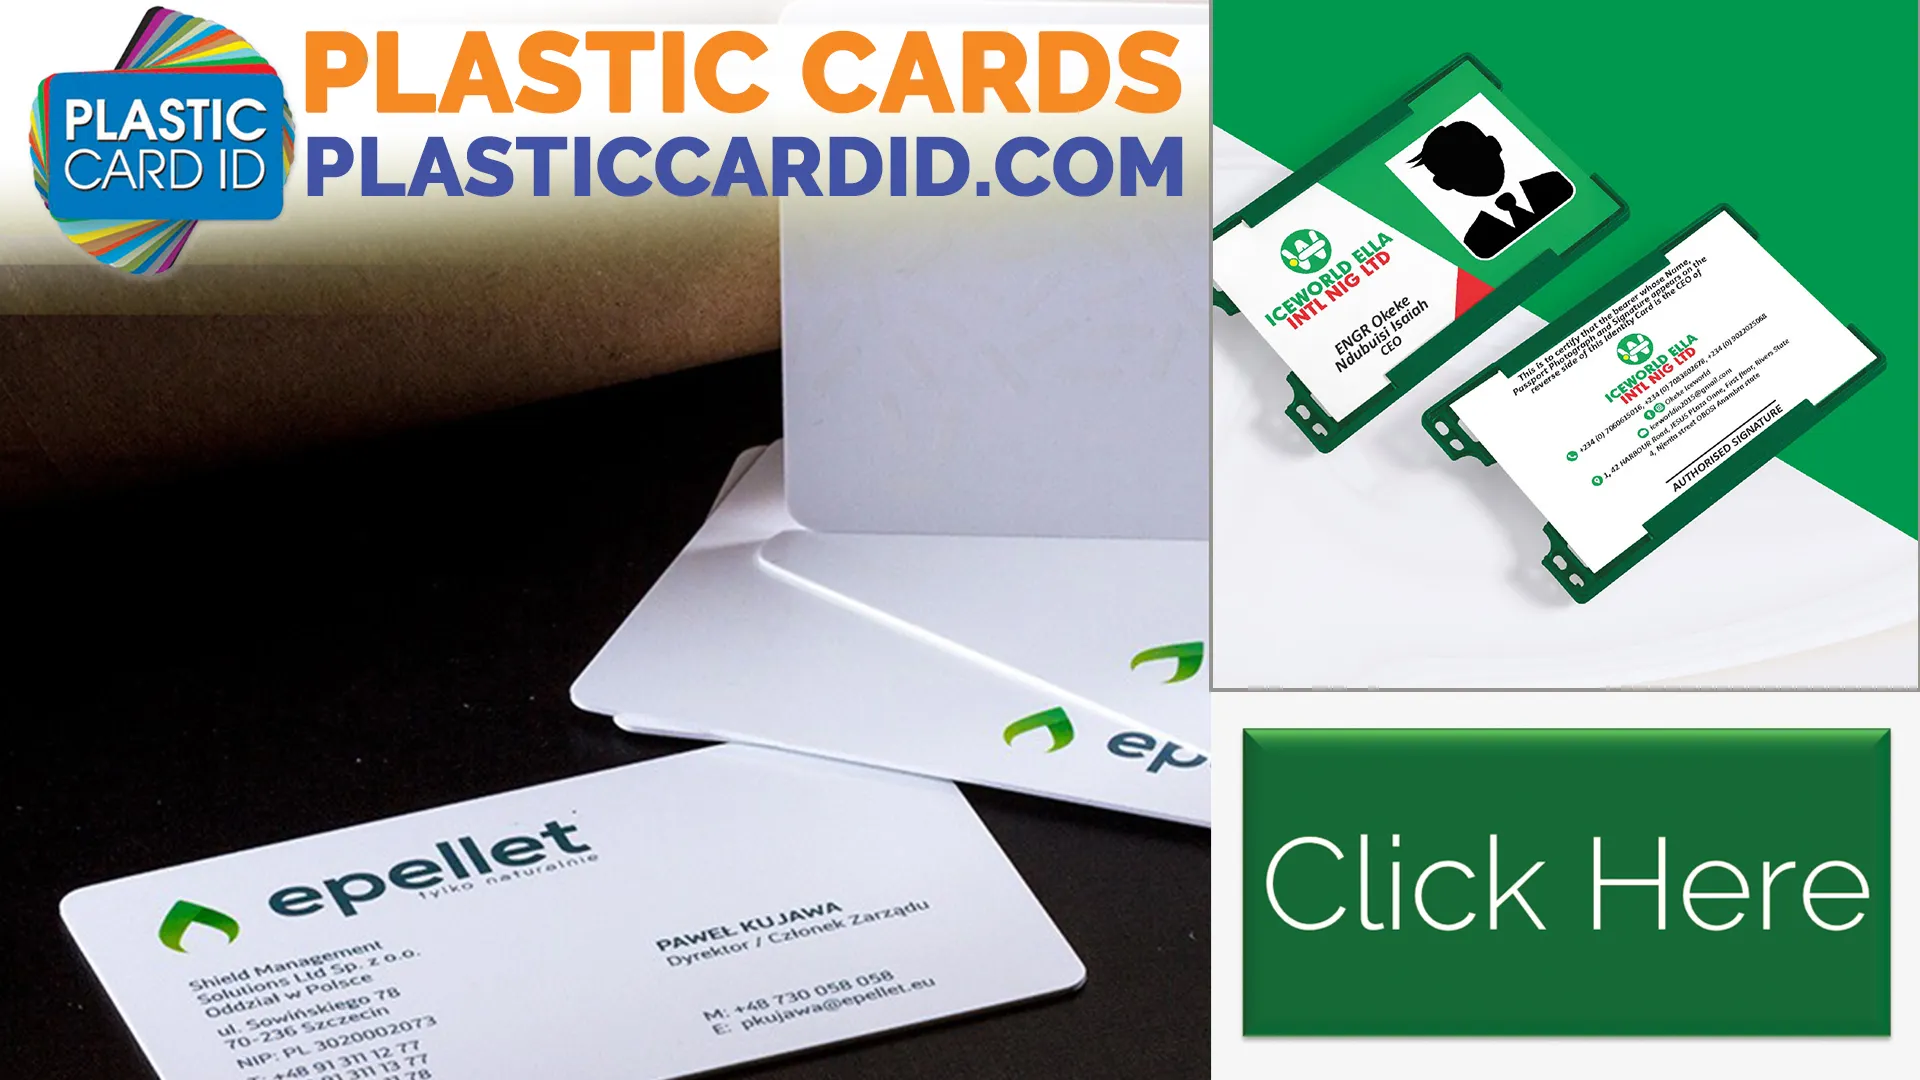 Welcome to Plastic Card ID
: Your National Solution for Bulk Order Logistics